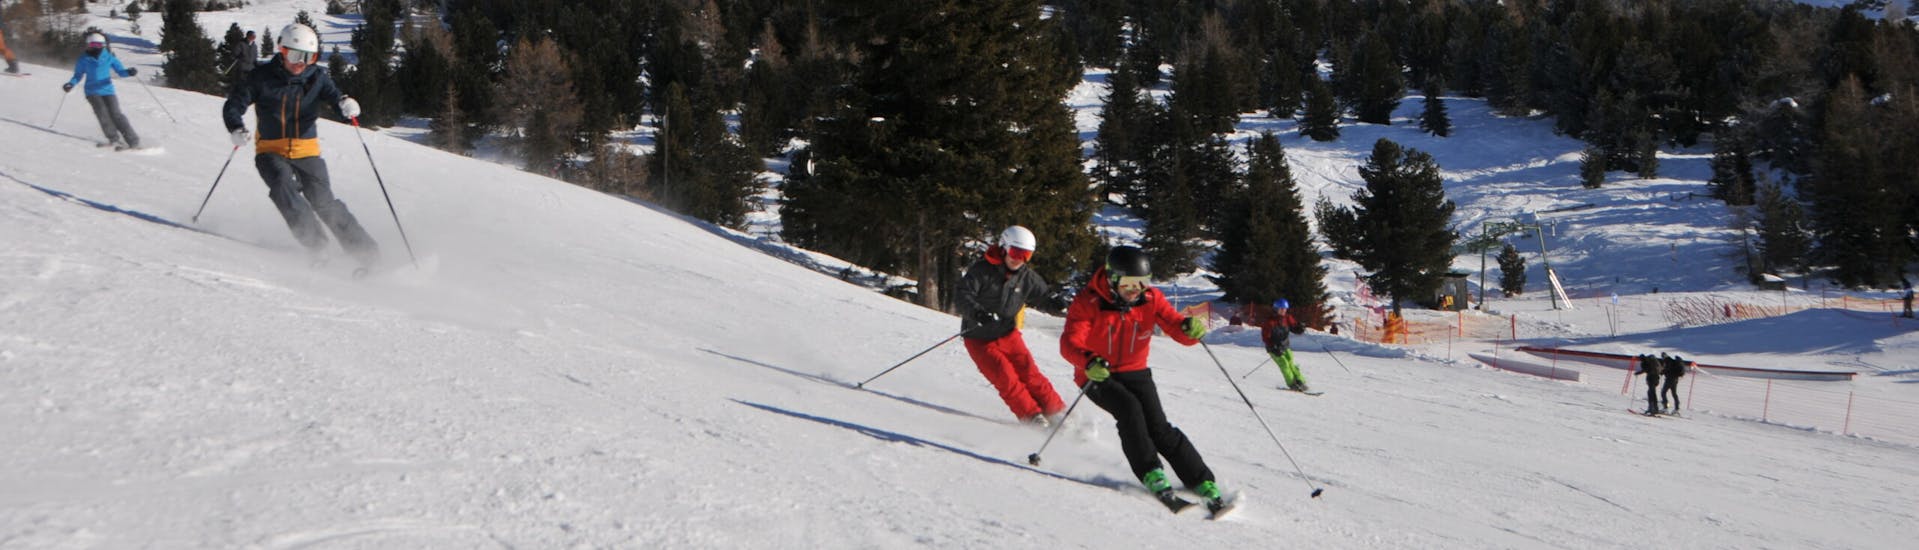 Private Ski Lessons for Adults with Experience from Ski- & Snowboardschule Innsbruck.